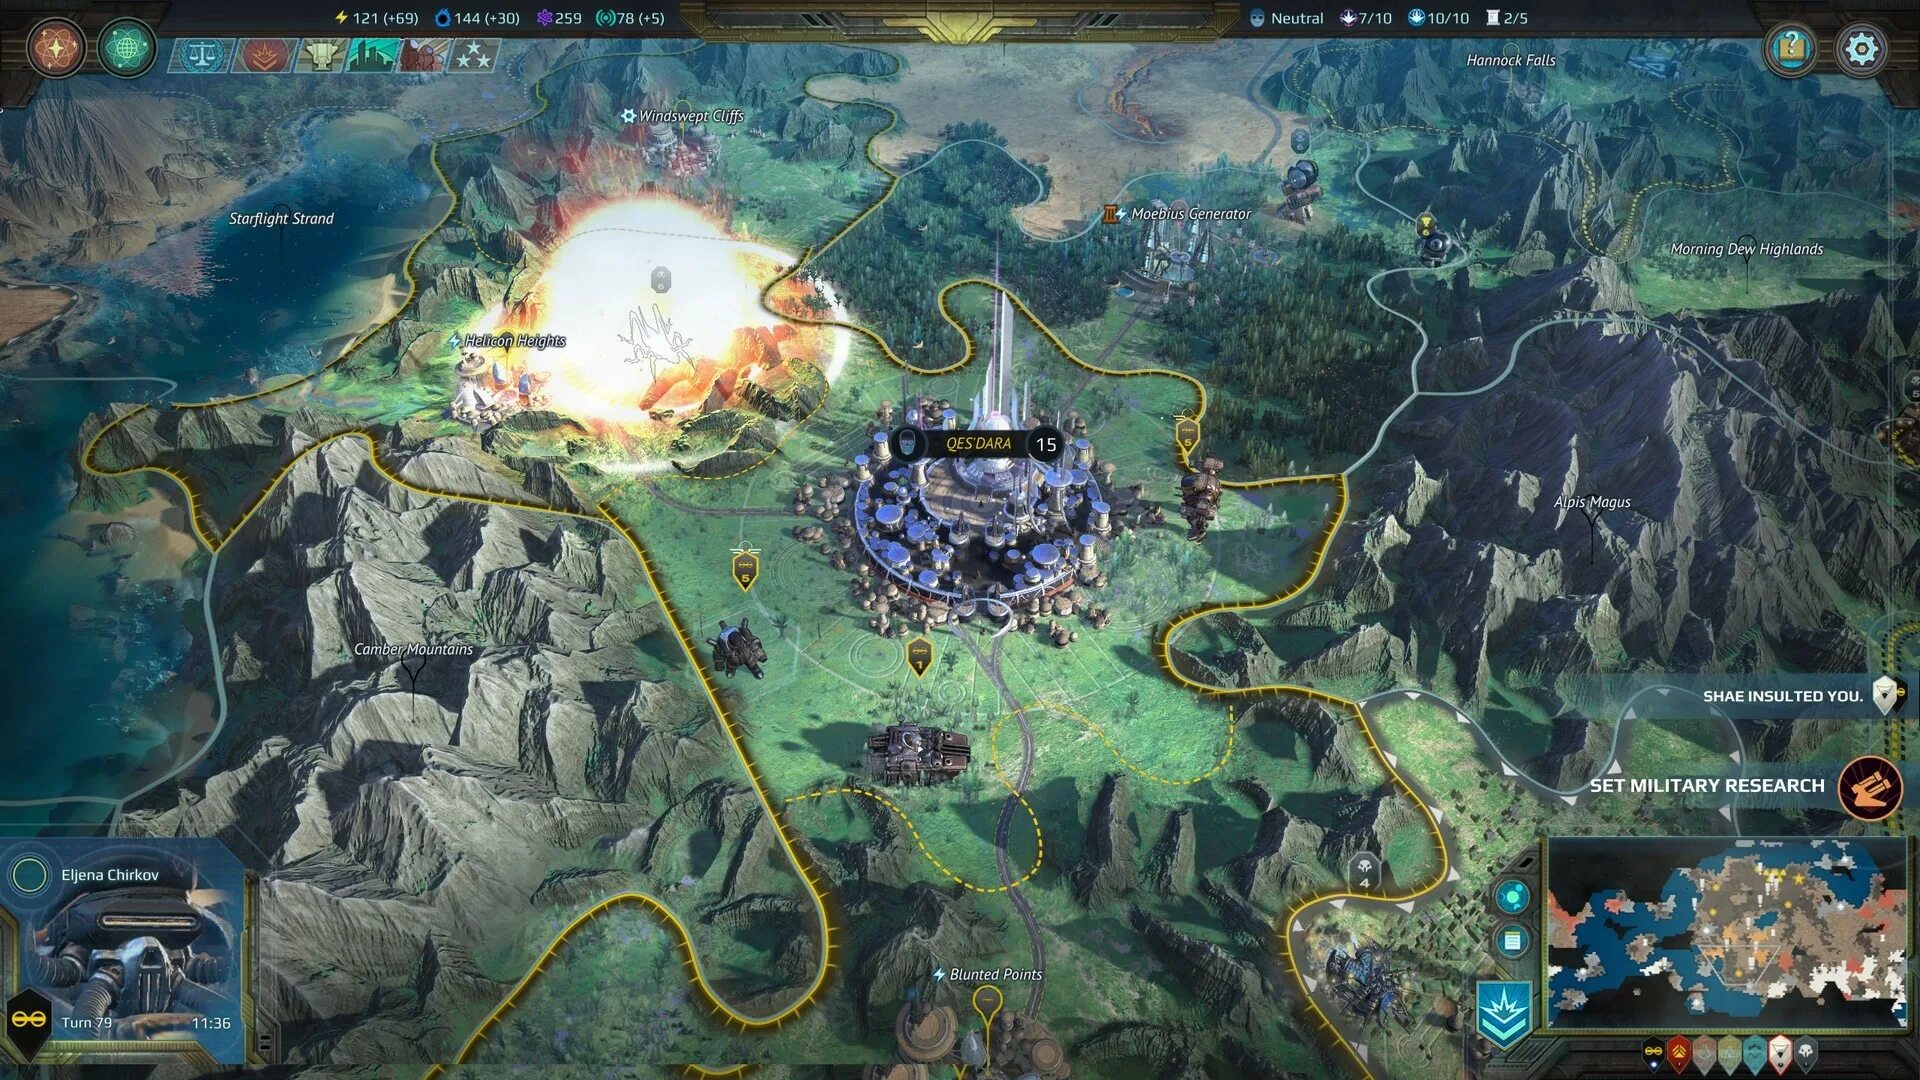 Wonder of the point. Игра "age of Wonders: Planetfall". Age of Wonders: Planetfall Premium. Age of Wonders Planetfall Звездный Союз. Age of Wonders Planetfall карты.